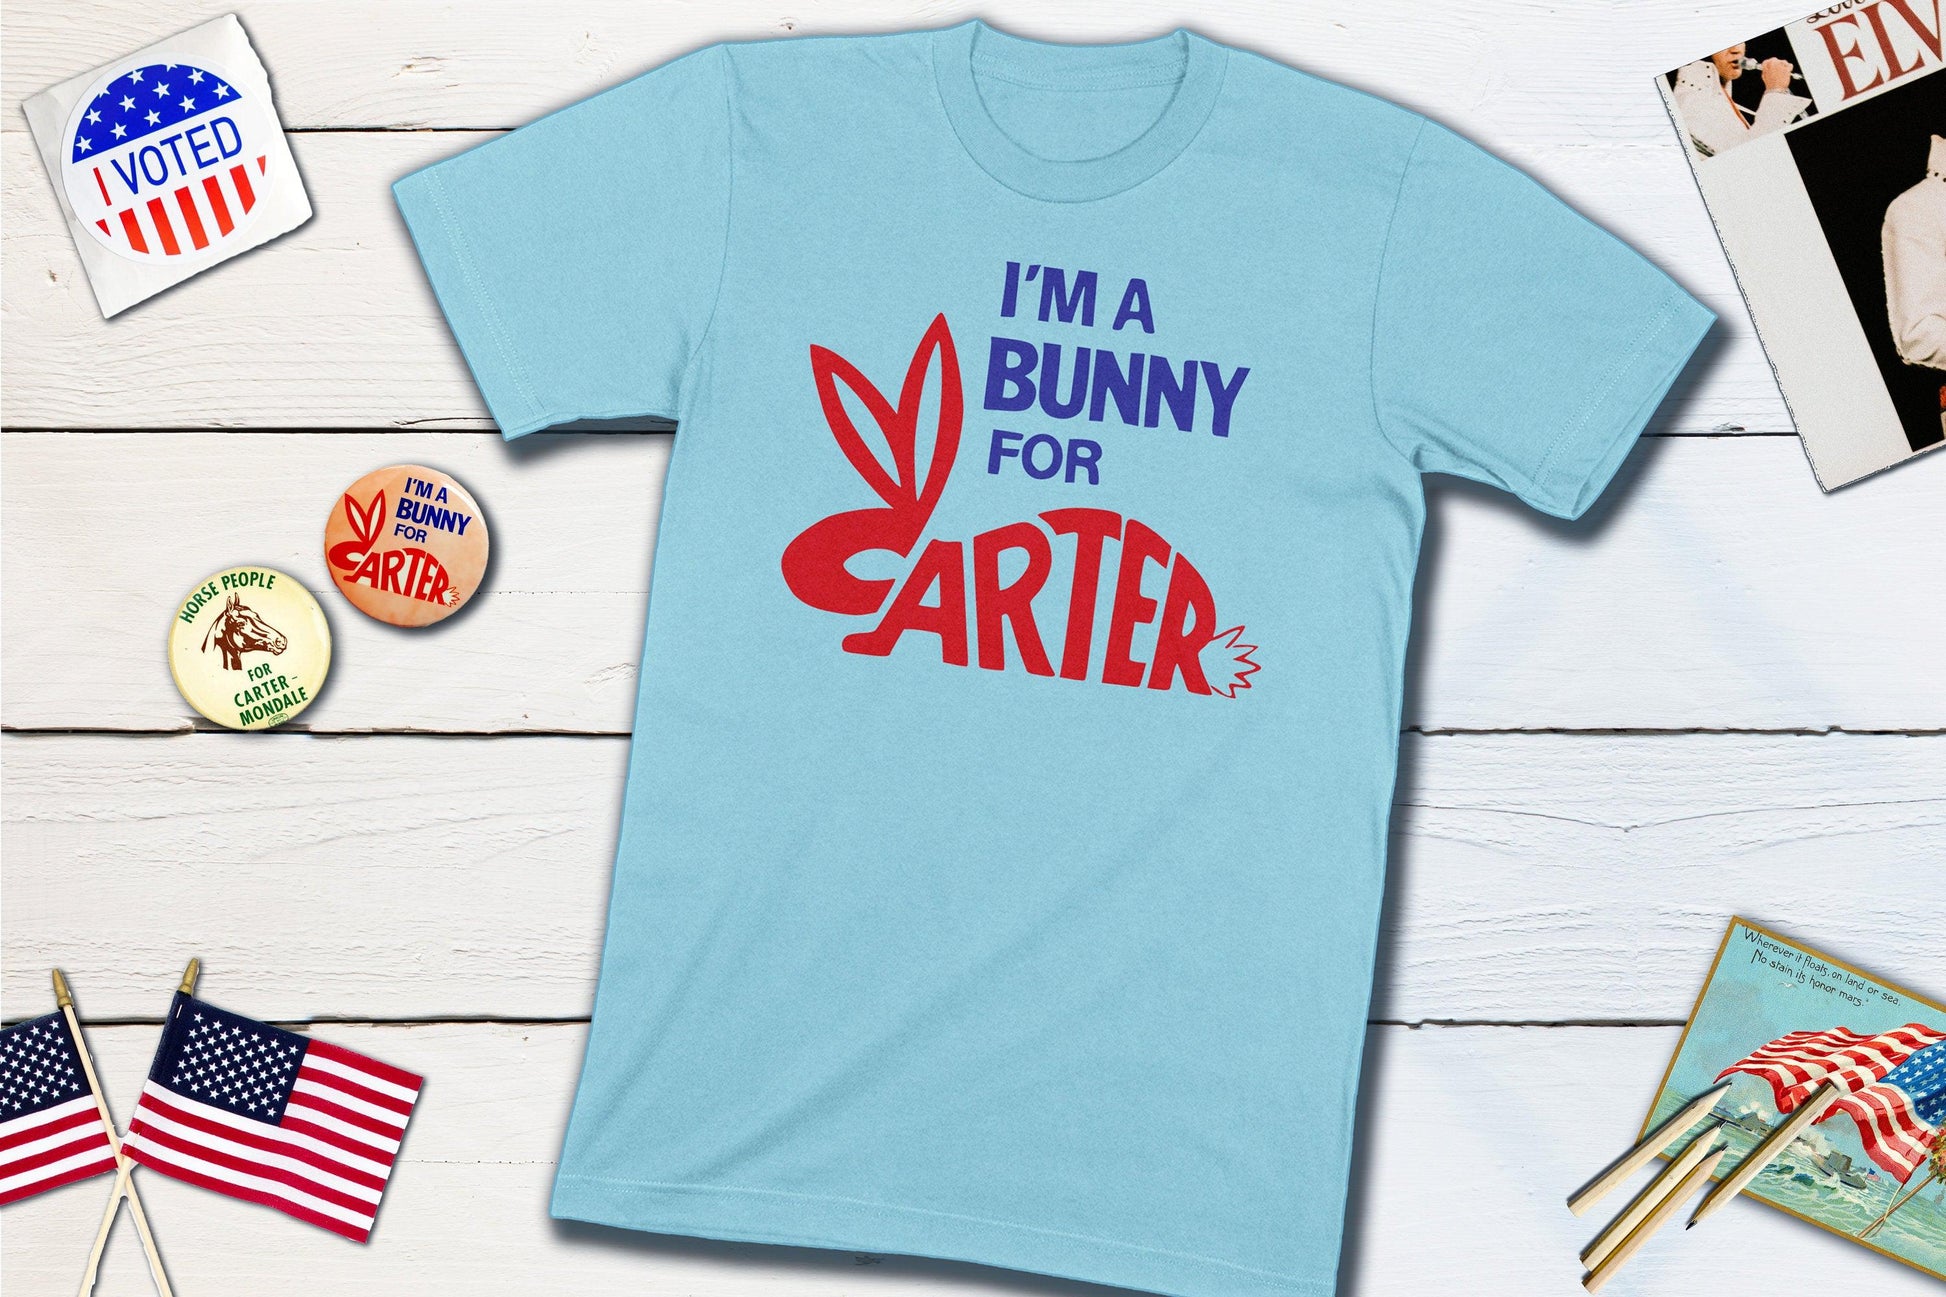 I'm A Bunny For Carter - Vintage Jimmy Carter Campaign Button Shirt-Unisex T-shirt-Yesteeyear